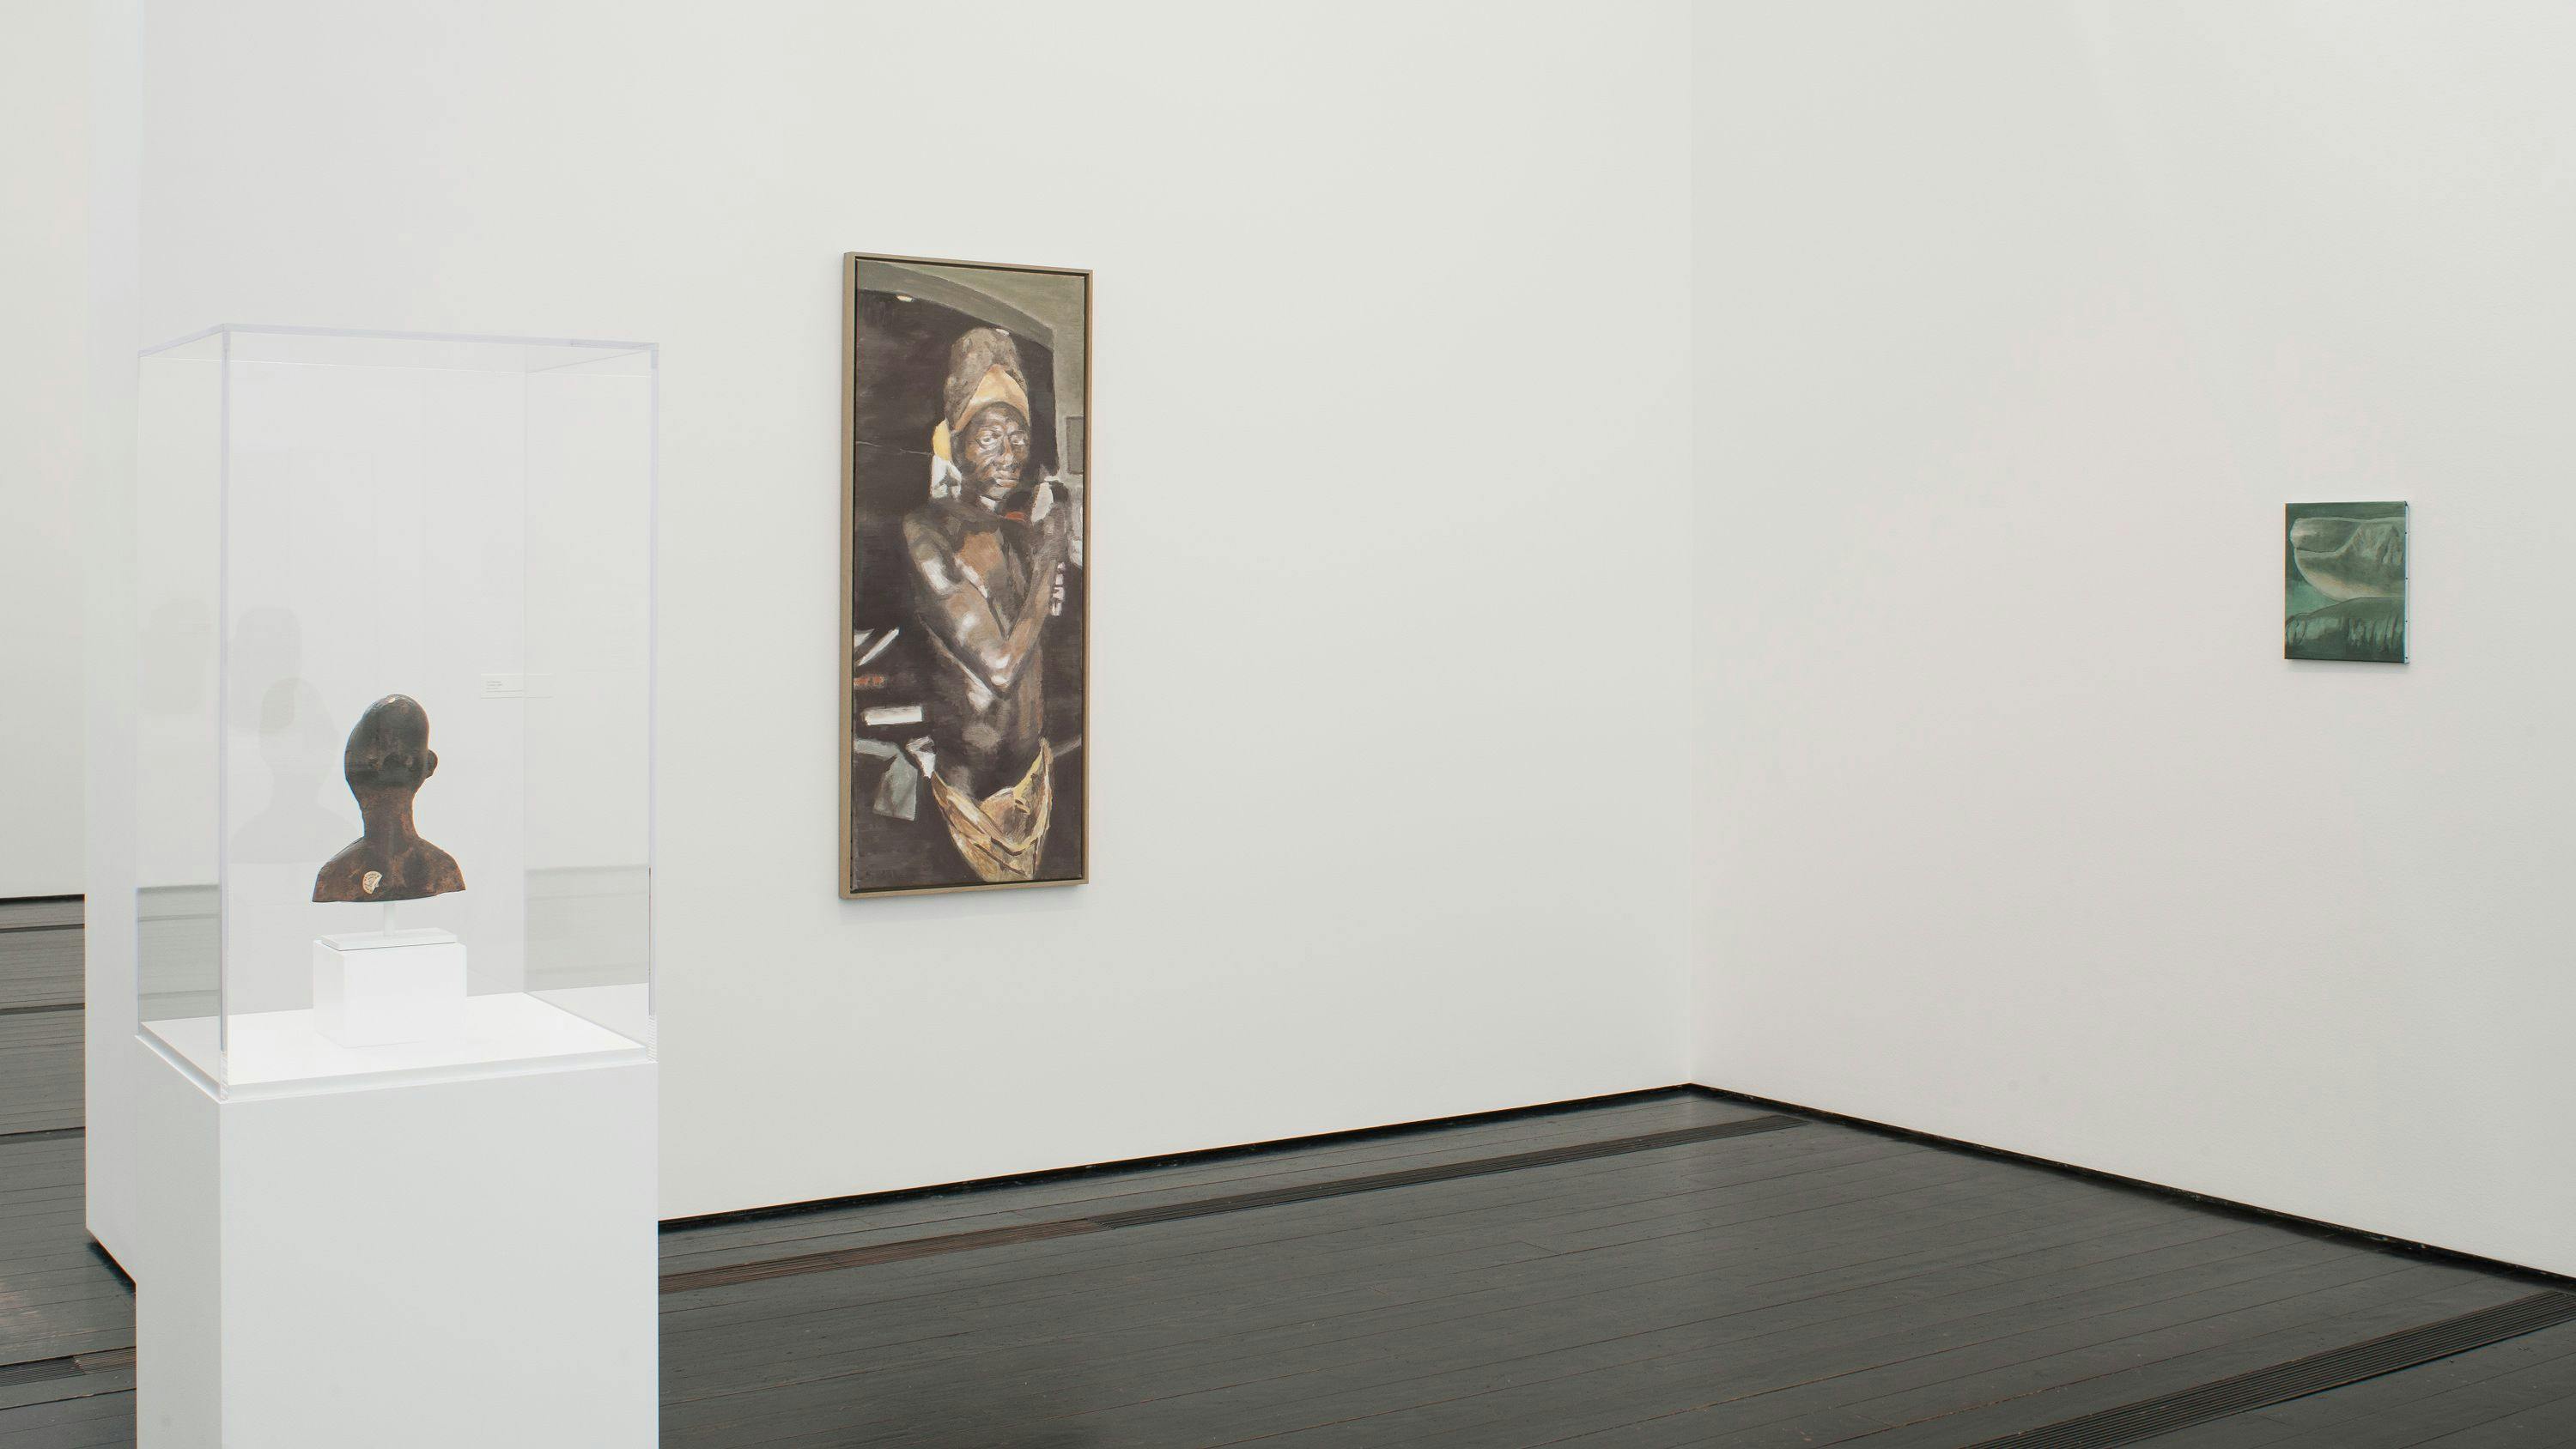 An installation view of the exhibition, Nice. Luc Tuymans, at  The Menil Collection in Houston, dated 2013.